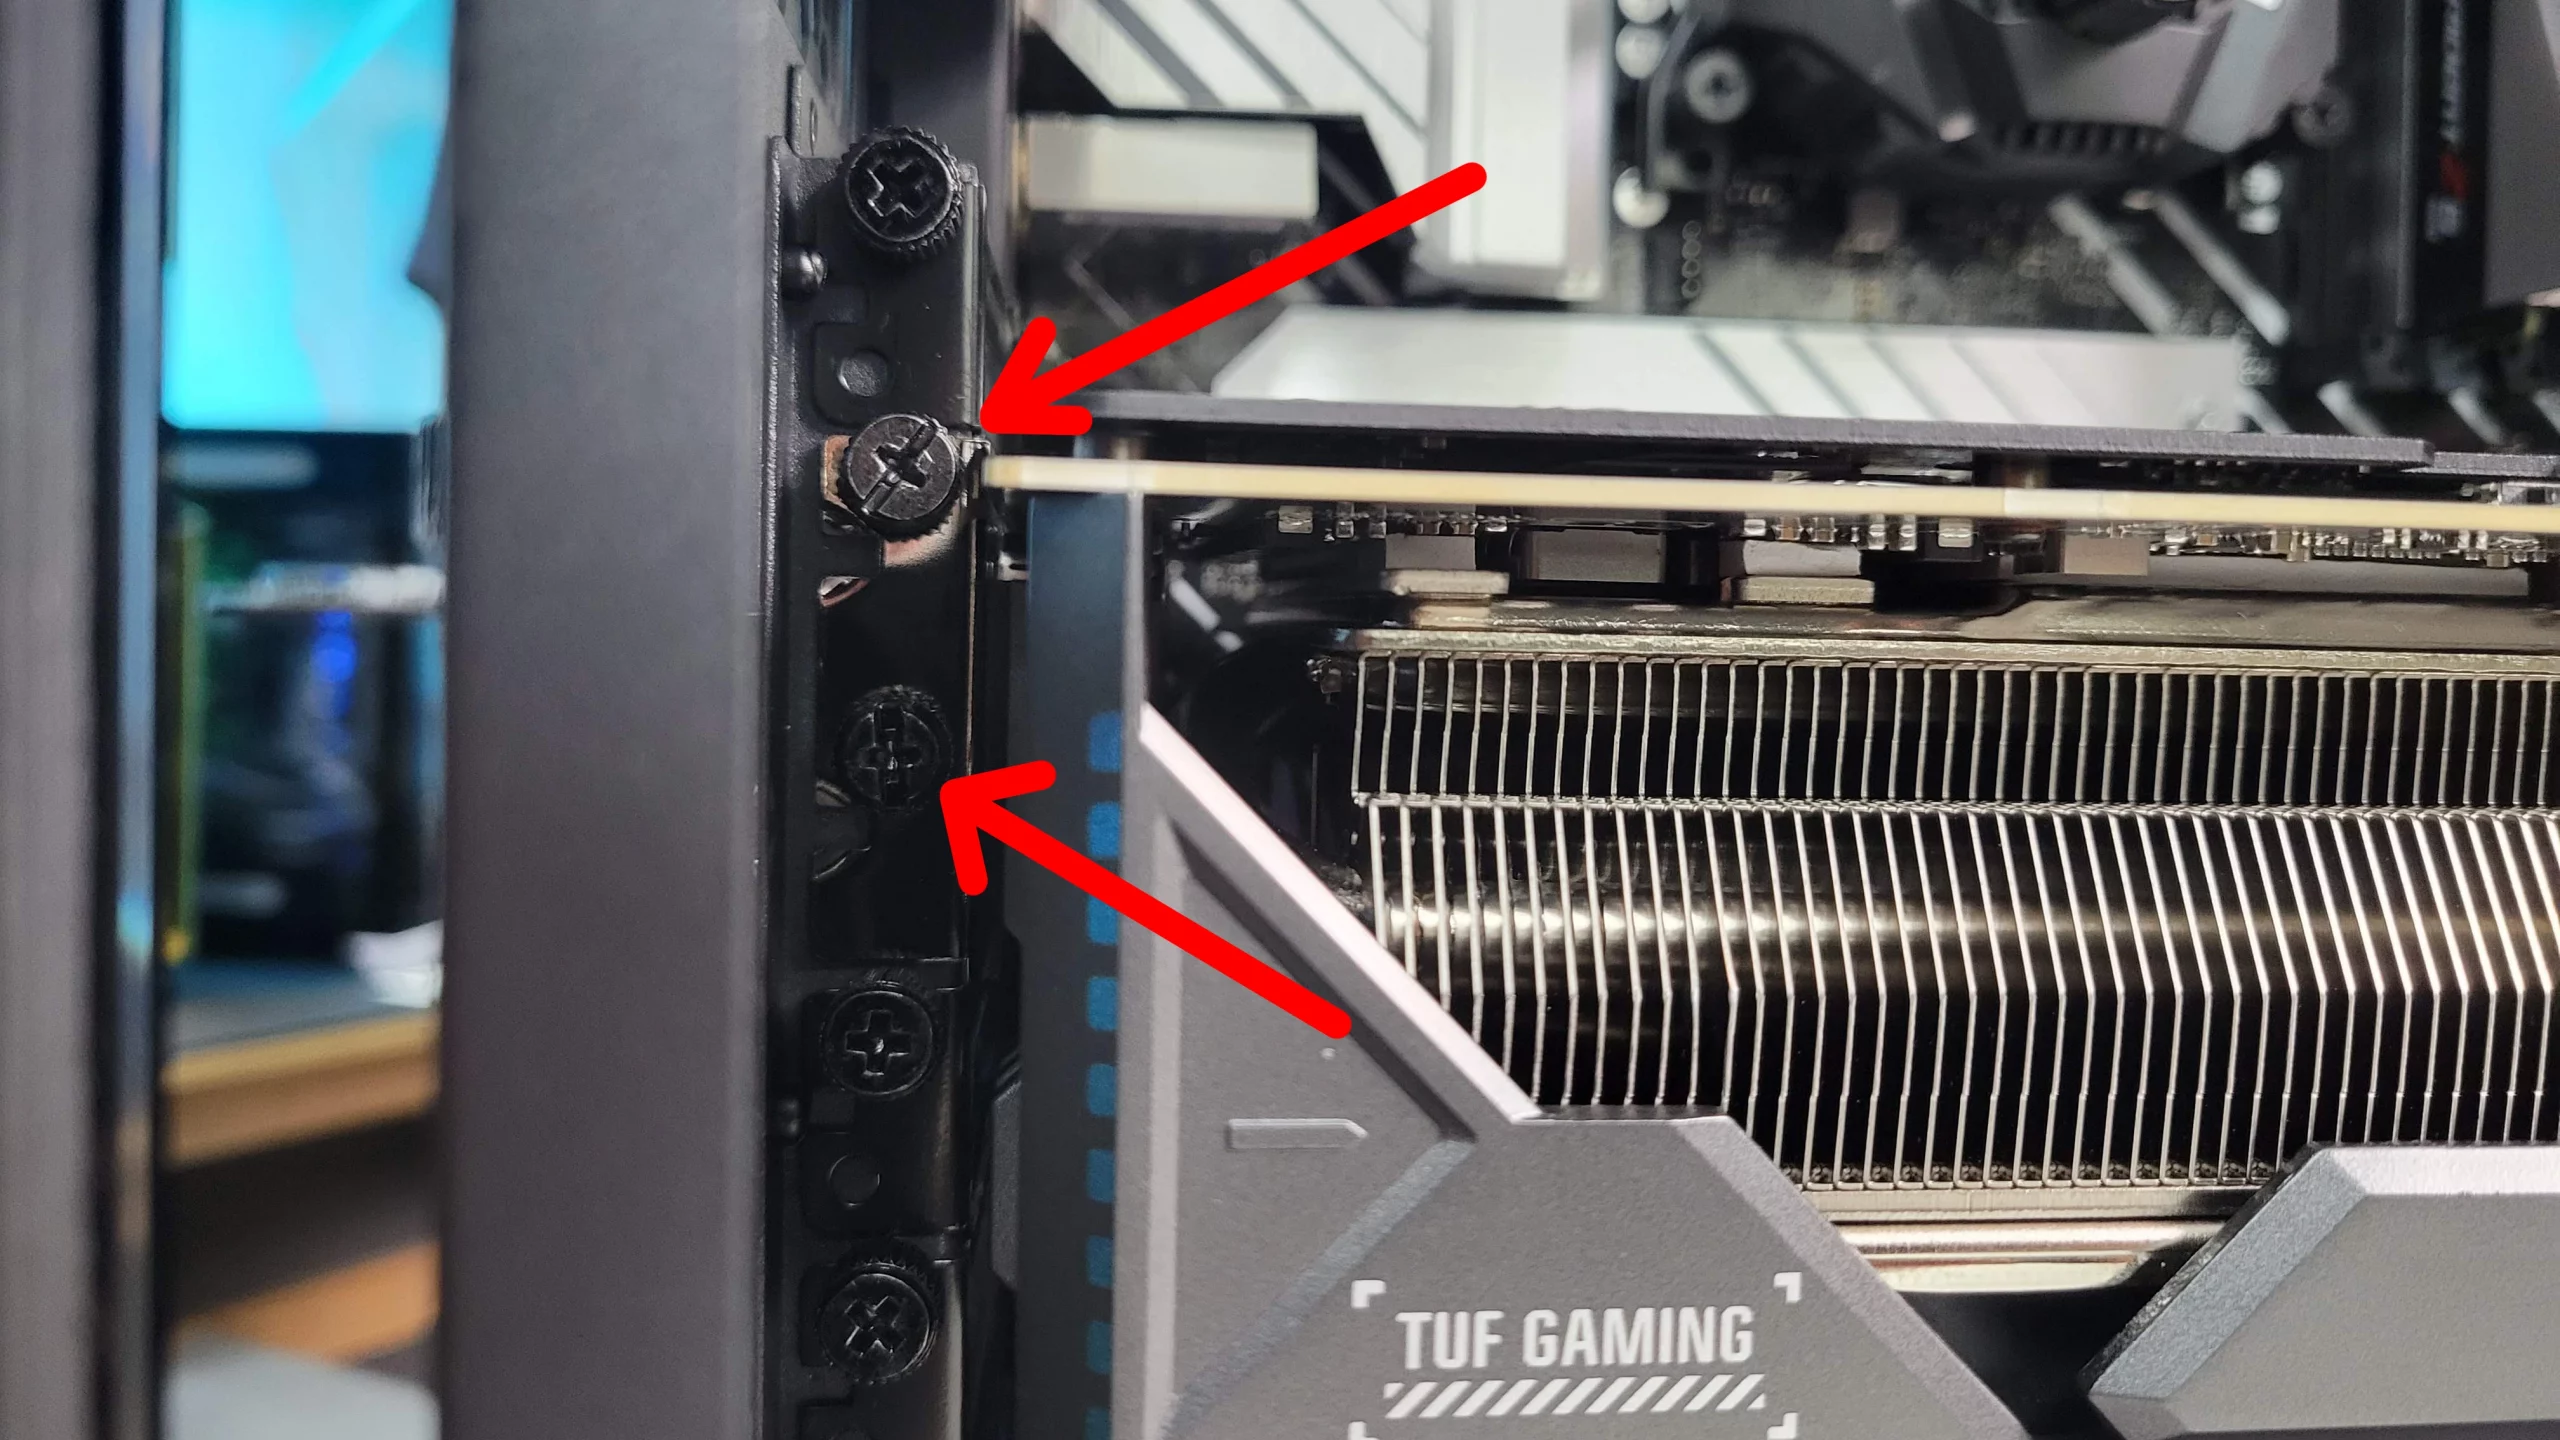 Securely attach graphics card to PCIe covers on back of case